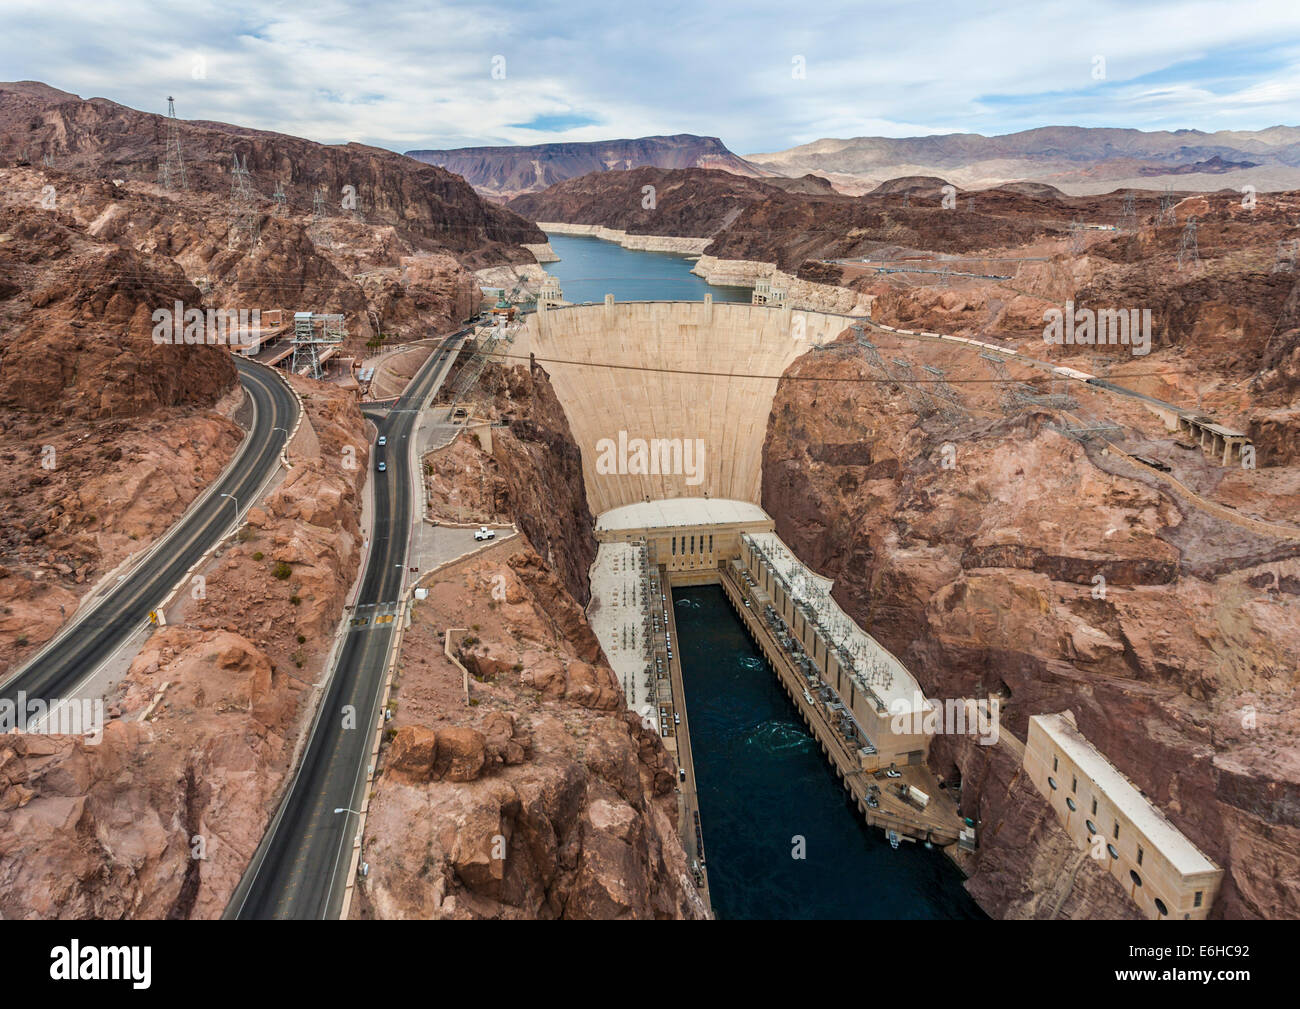 Lake Mead reservoir behind the Hoover Dam in the Black Canyon of the Colorado River near Boulder City, Nevada Stock Photo